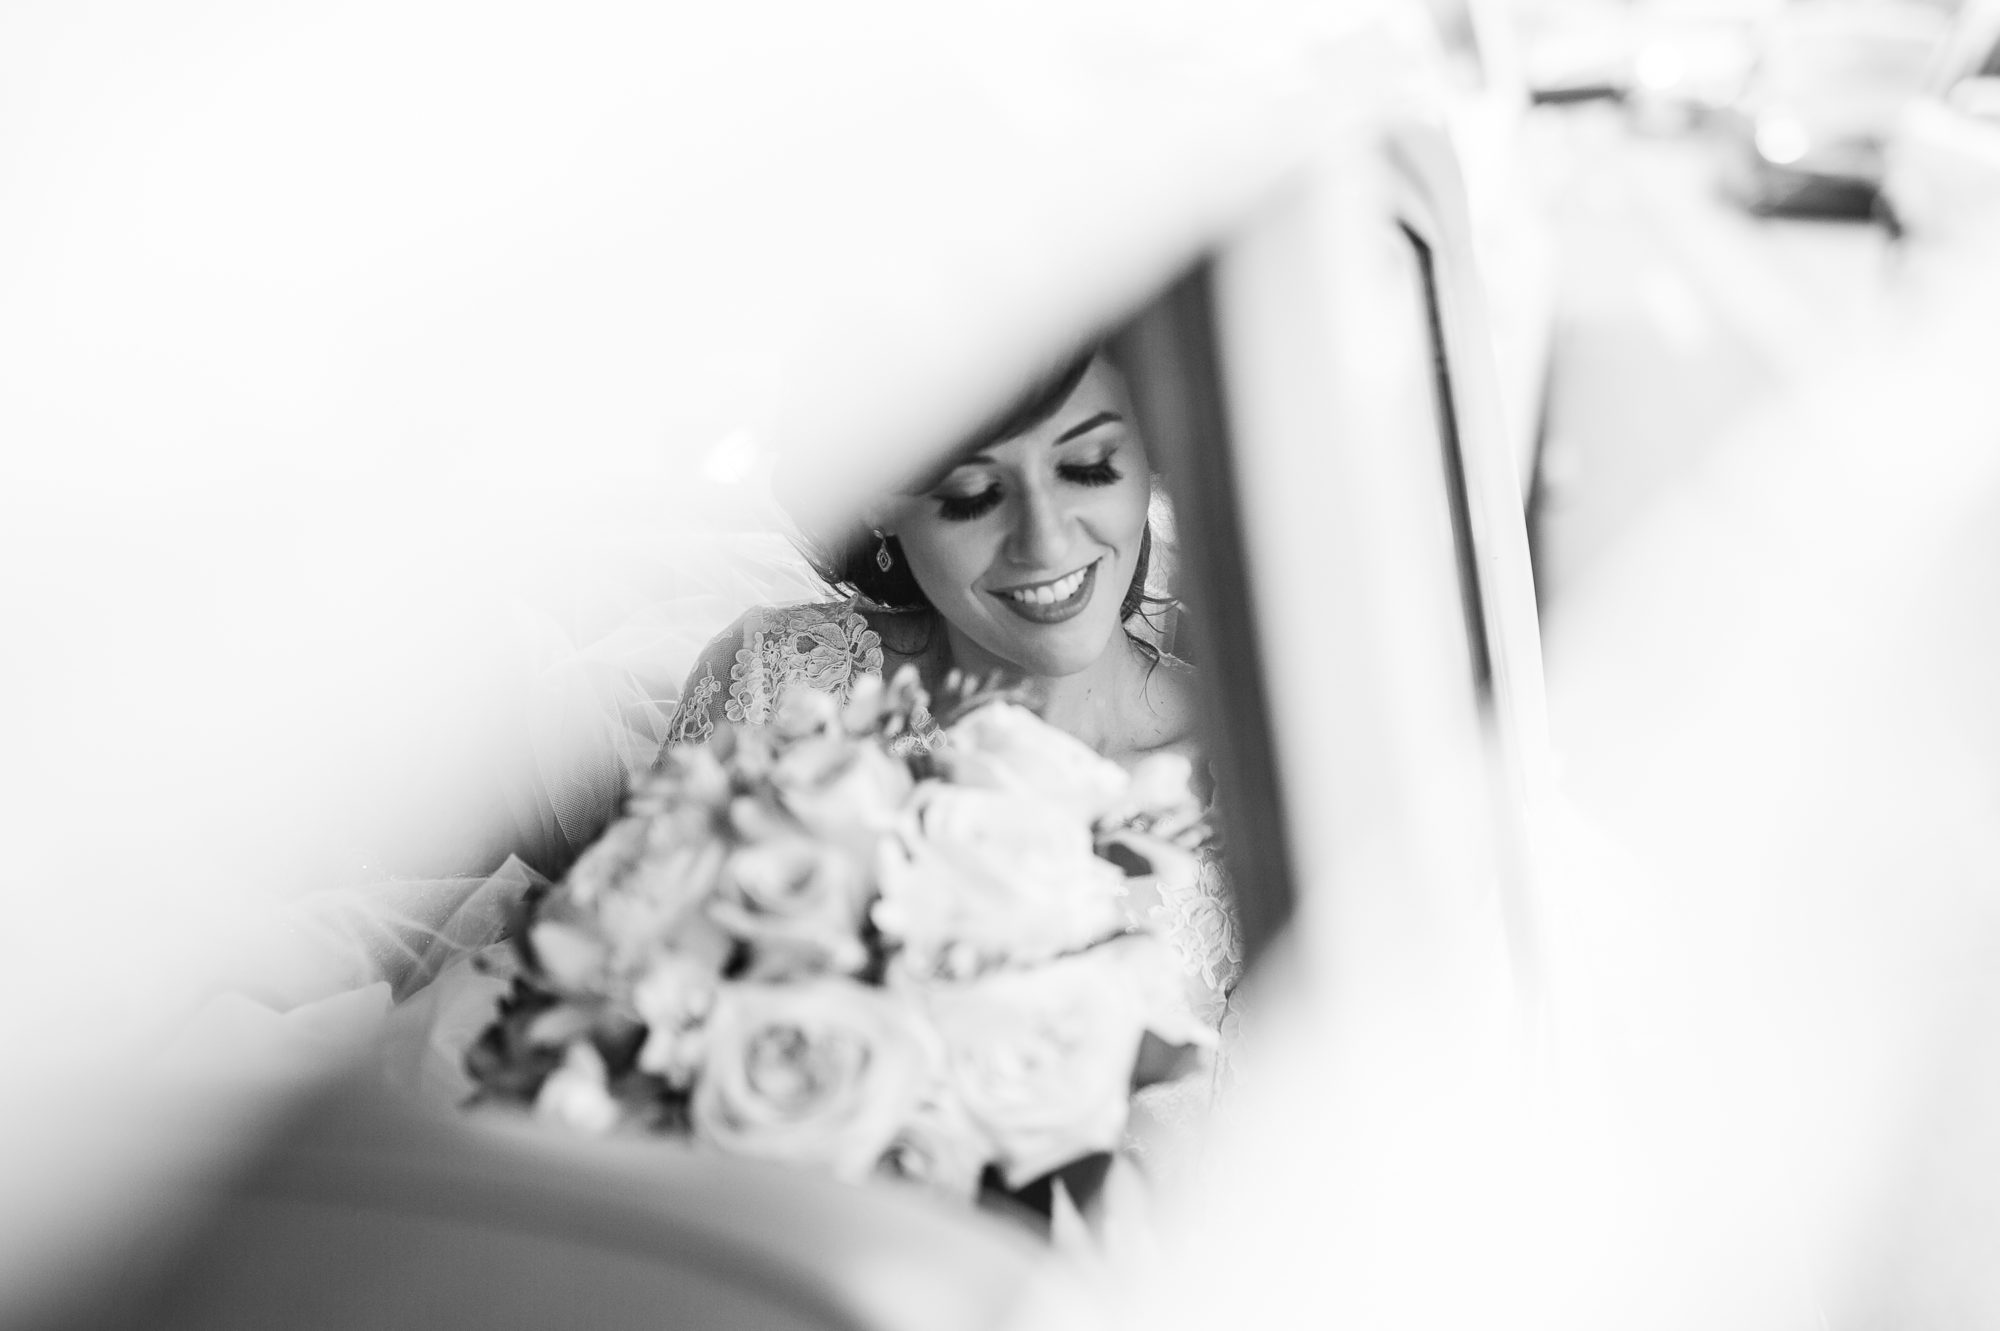 Elegant portrait of the bride arriving in her car to the wedding ceremony at Our Lady of Lebanon